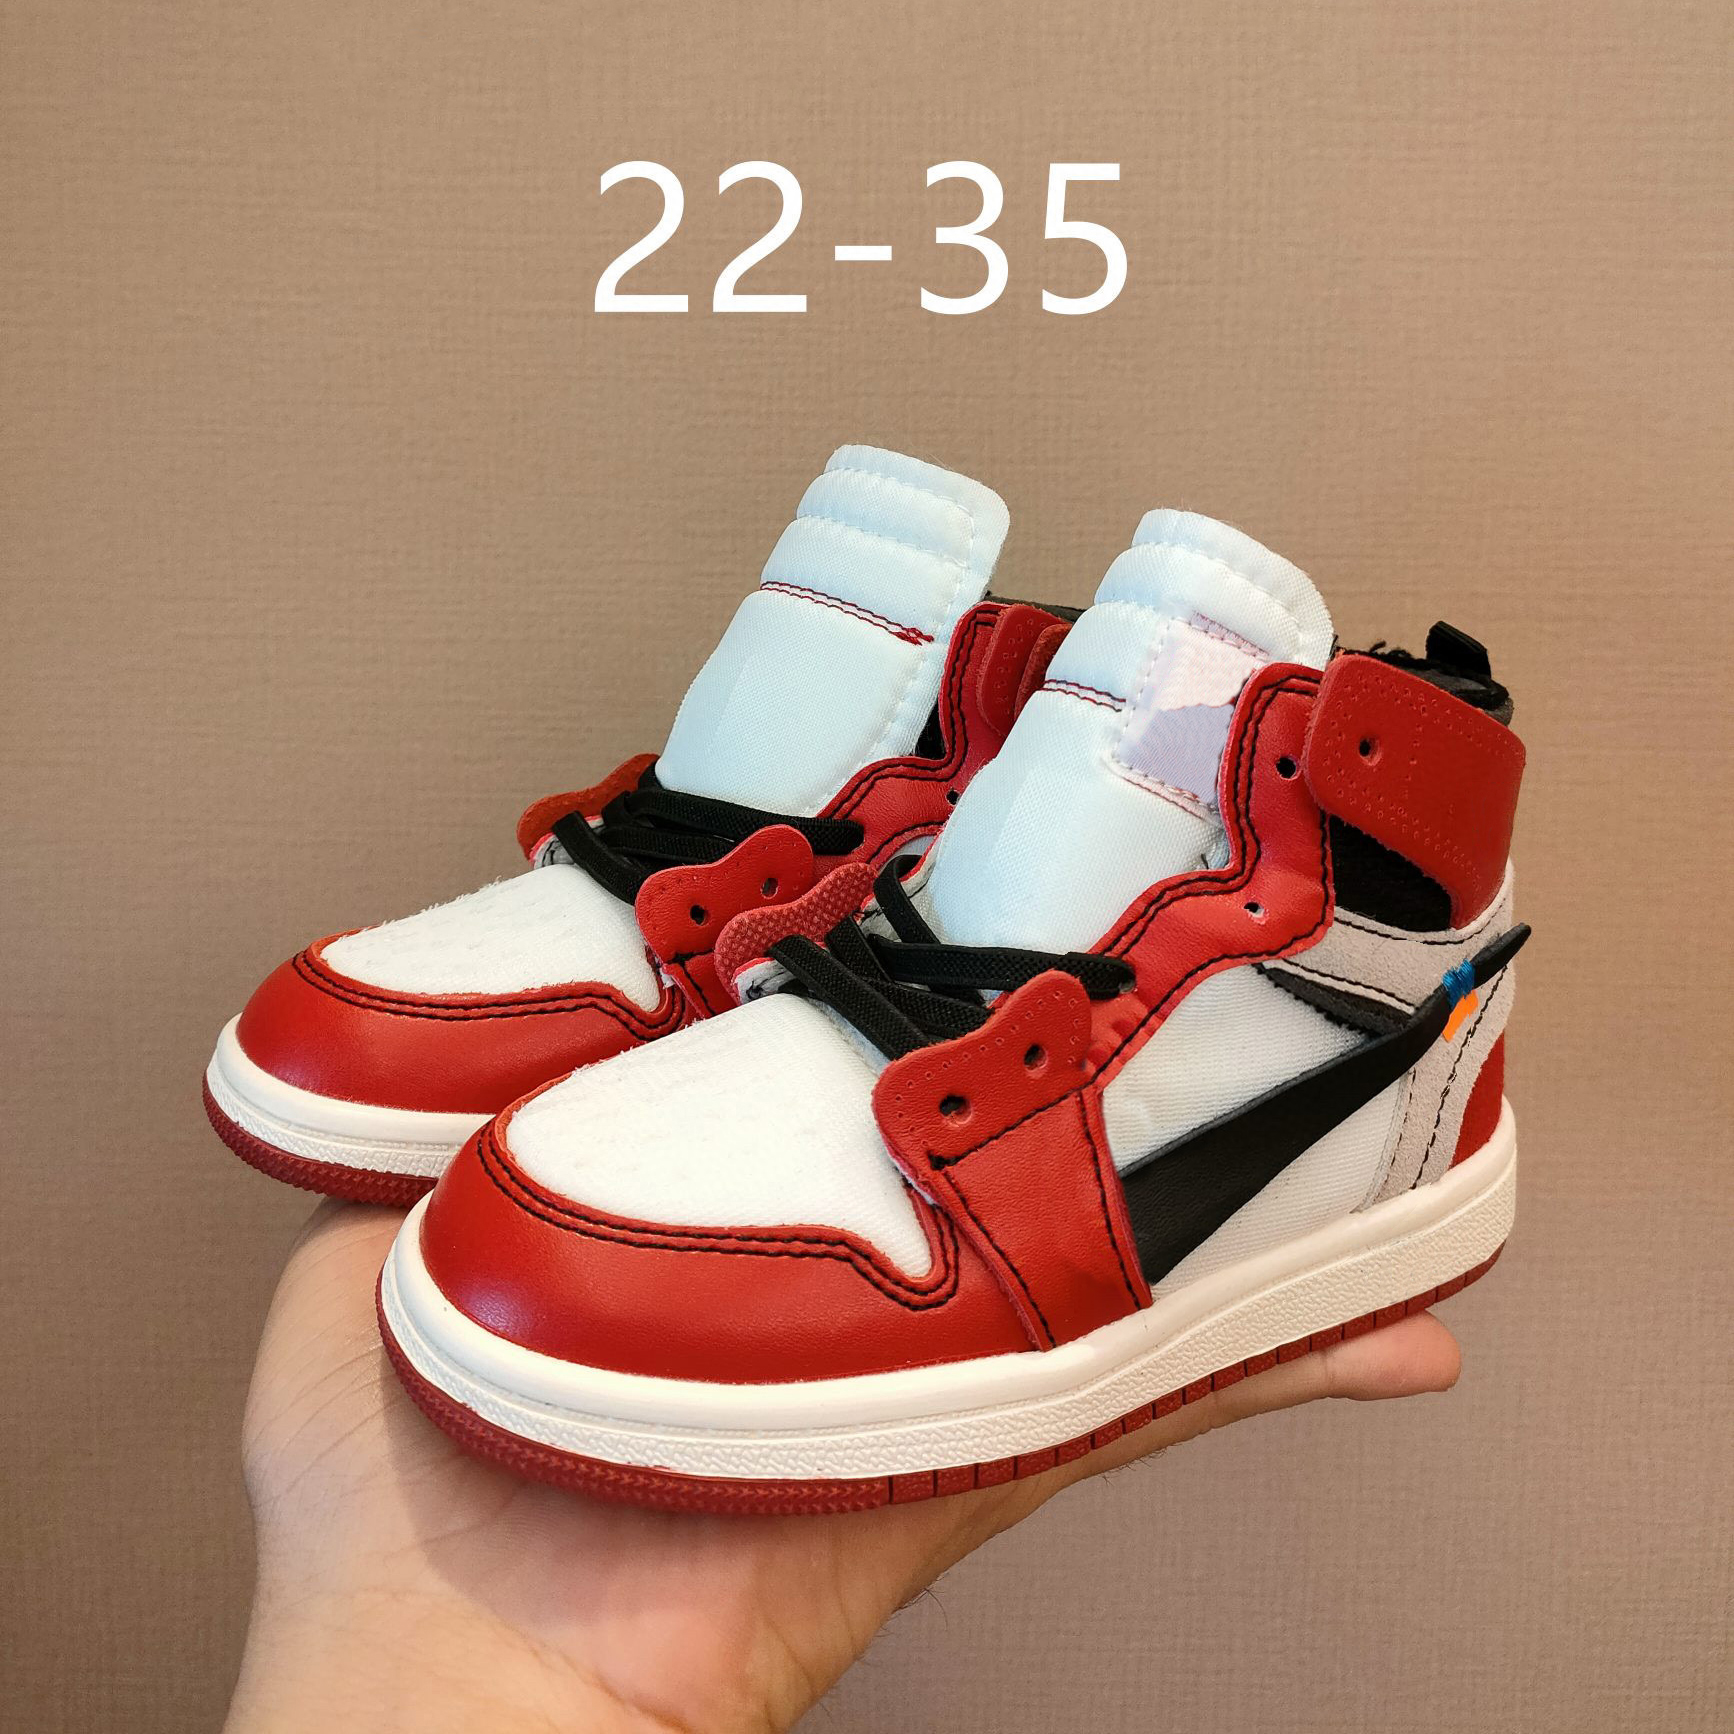 

nfants Reverse Mocha T SC0TT Fragments Jointly Signed High lOW OG 1s Kids Basketball shoes Chicago 1 Infant UNC Sneaker Toddlers New Born Baby Children footwear, Customize